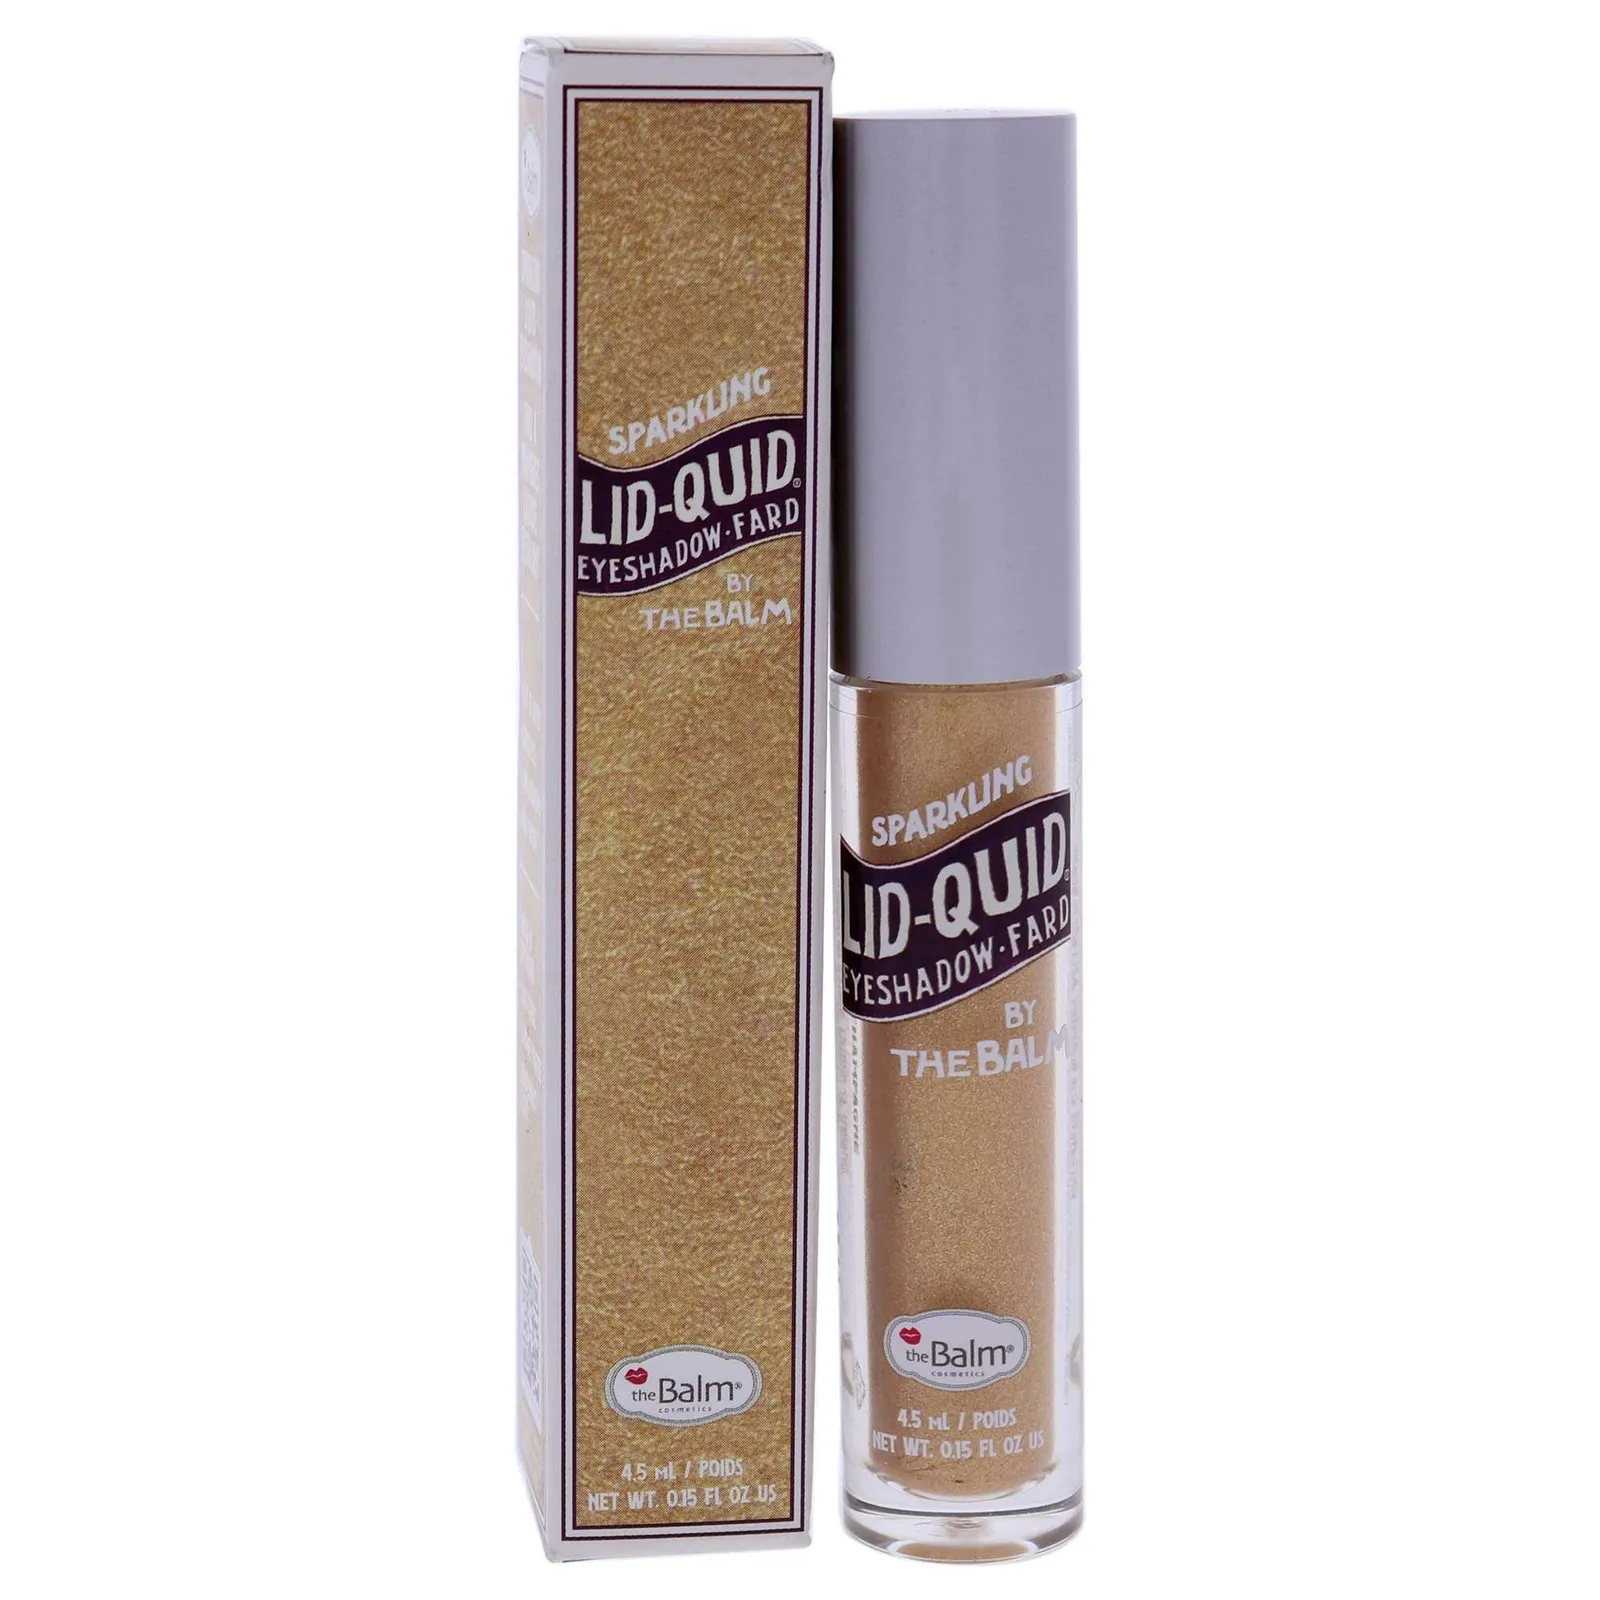 Lid-Quid Sparkling Liquid Eyeshadow - Champagne by the Balm for Women - ... - $20.00